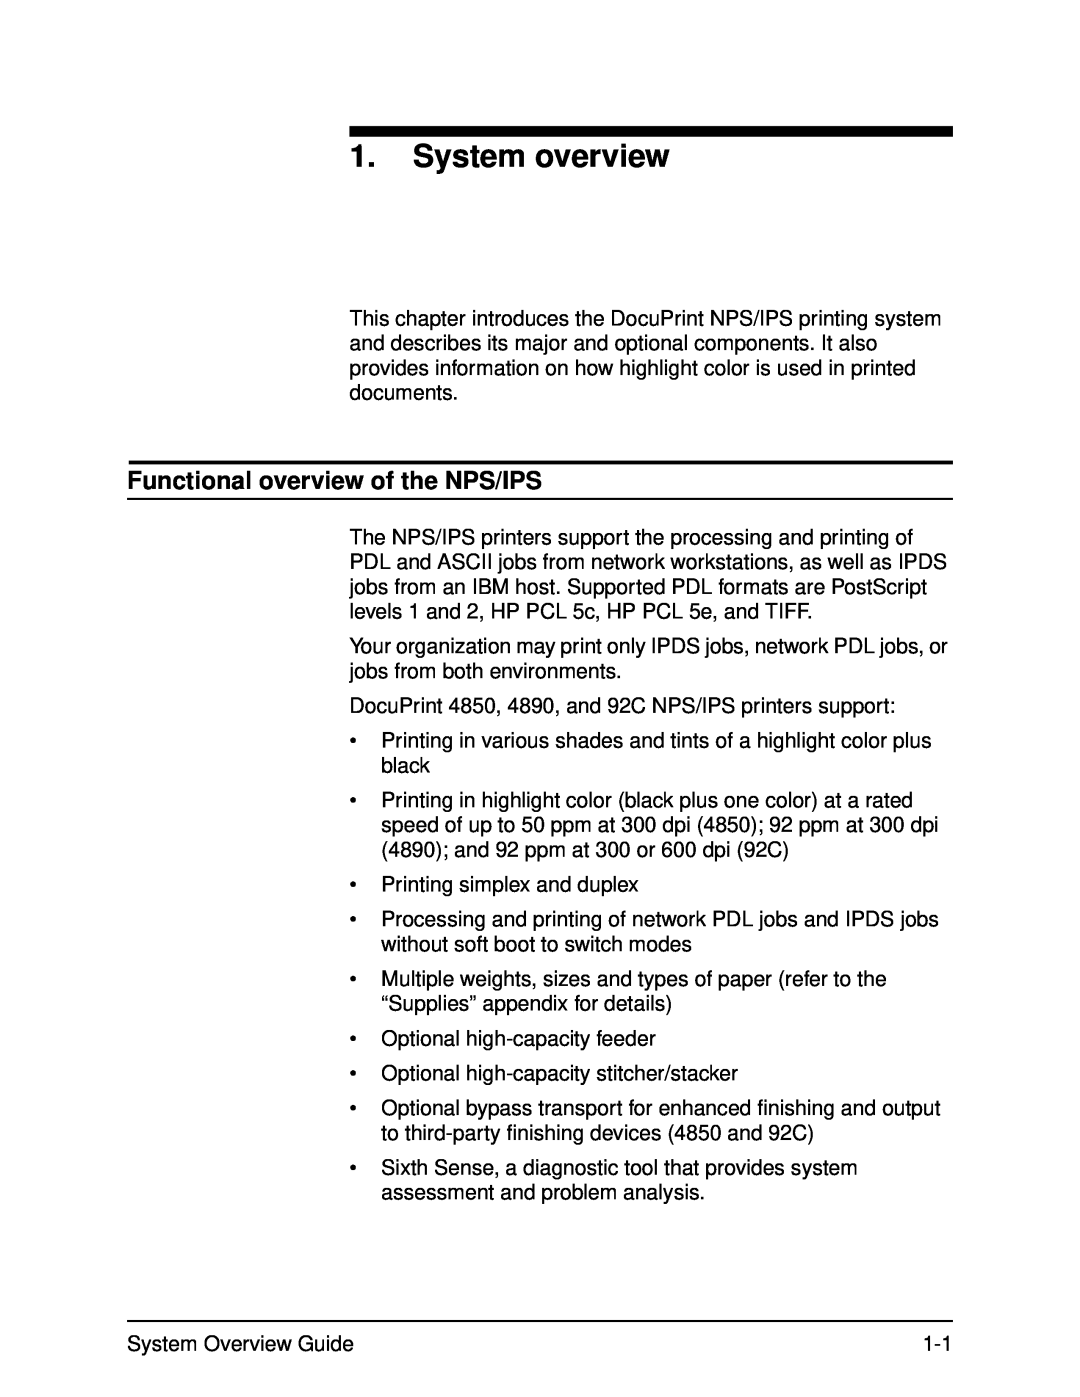 Xerox 92C, 4890, 4850 manual System overview, Functional overview of the NPS/IPS 